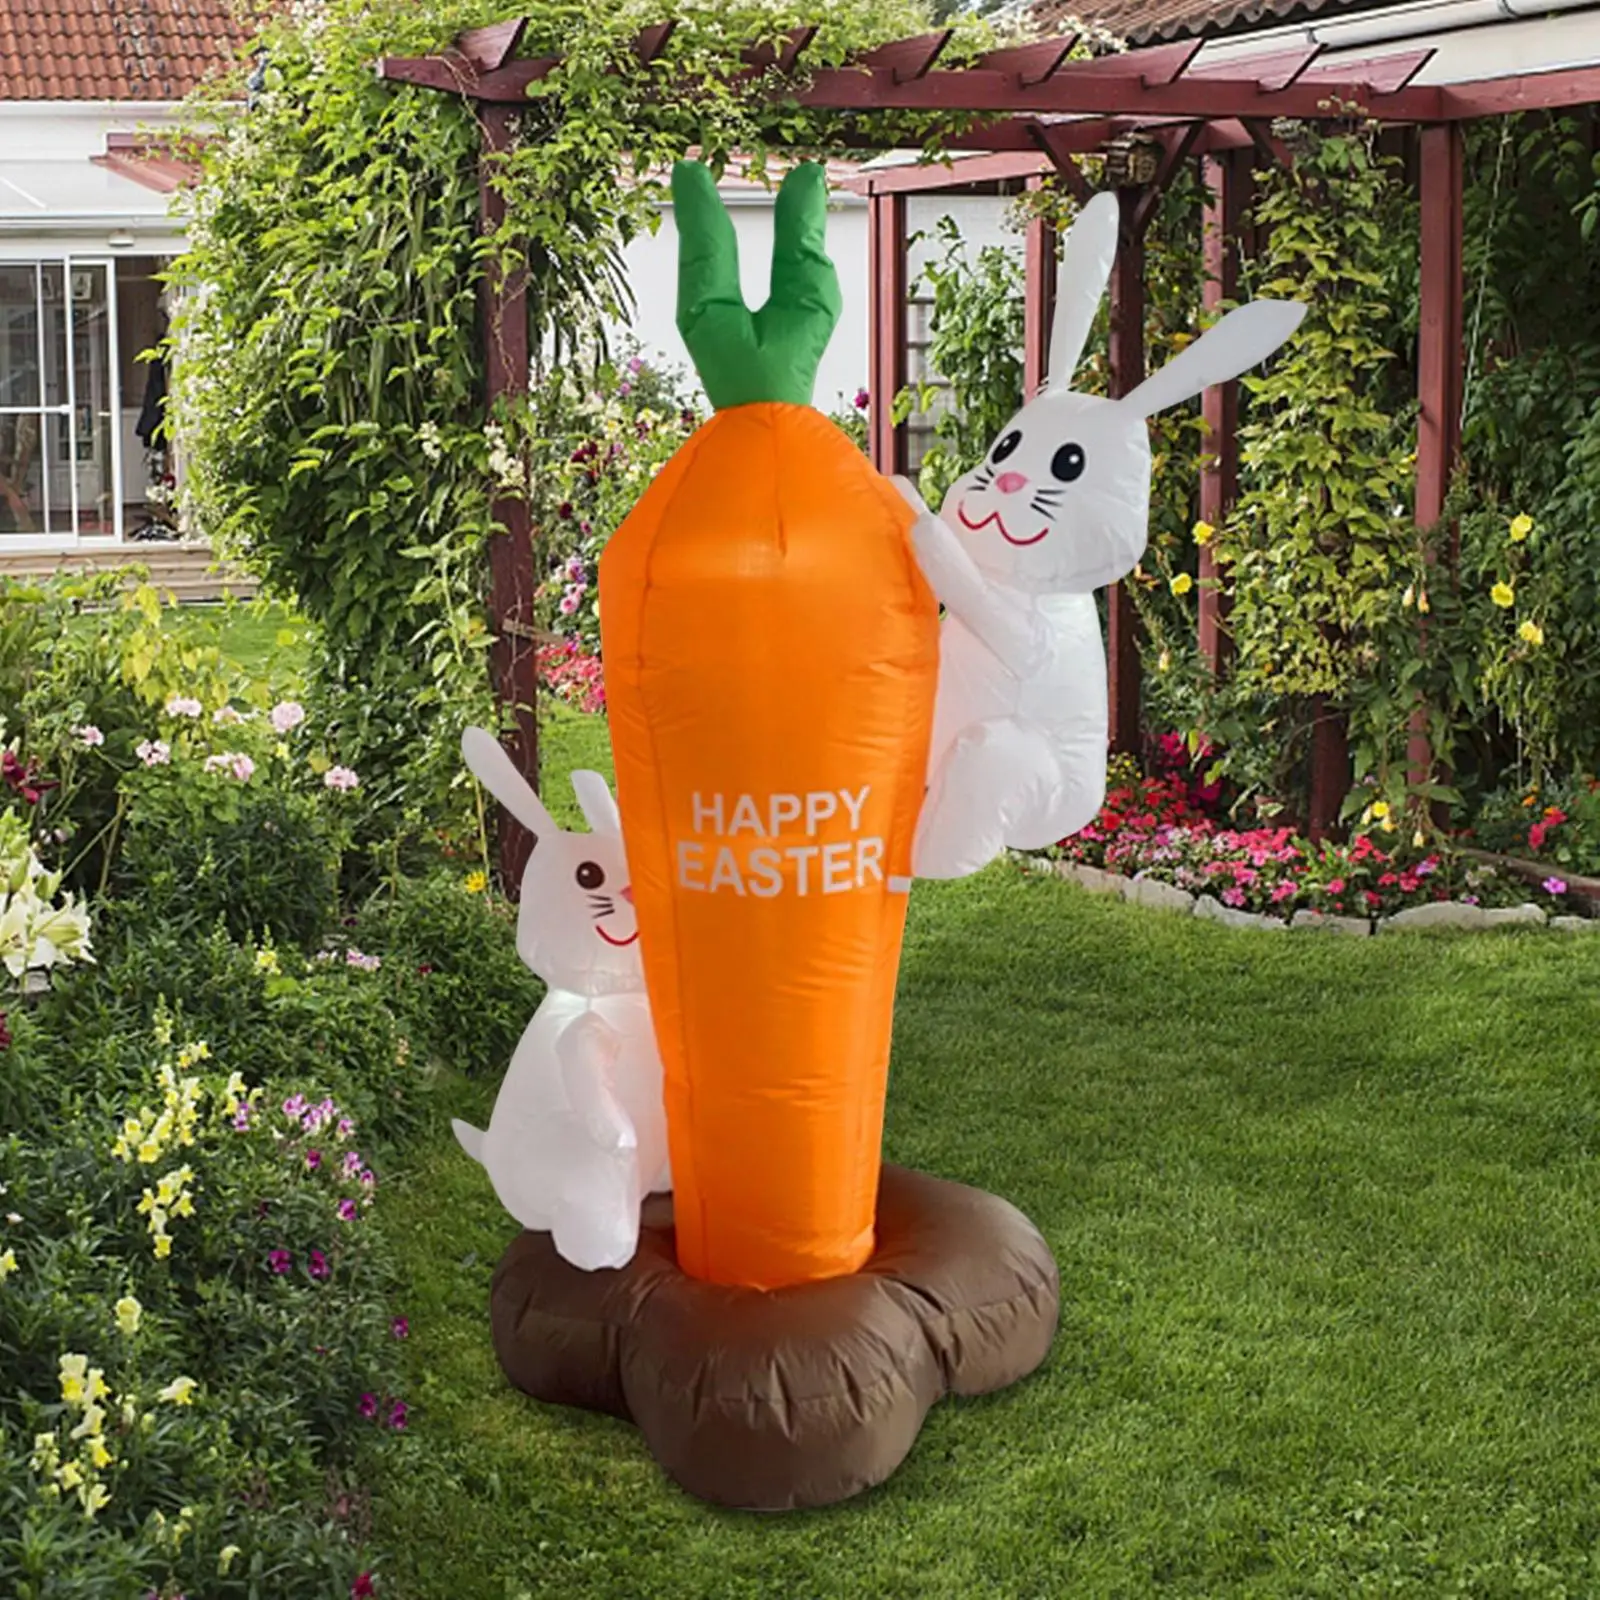 Easter Inflatable Bunny and Carrot Built in LEDs Decorative Carrot for Decor